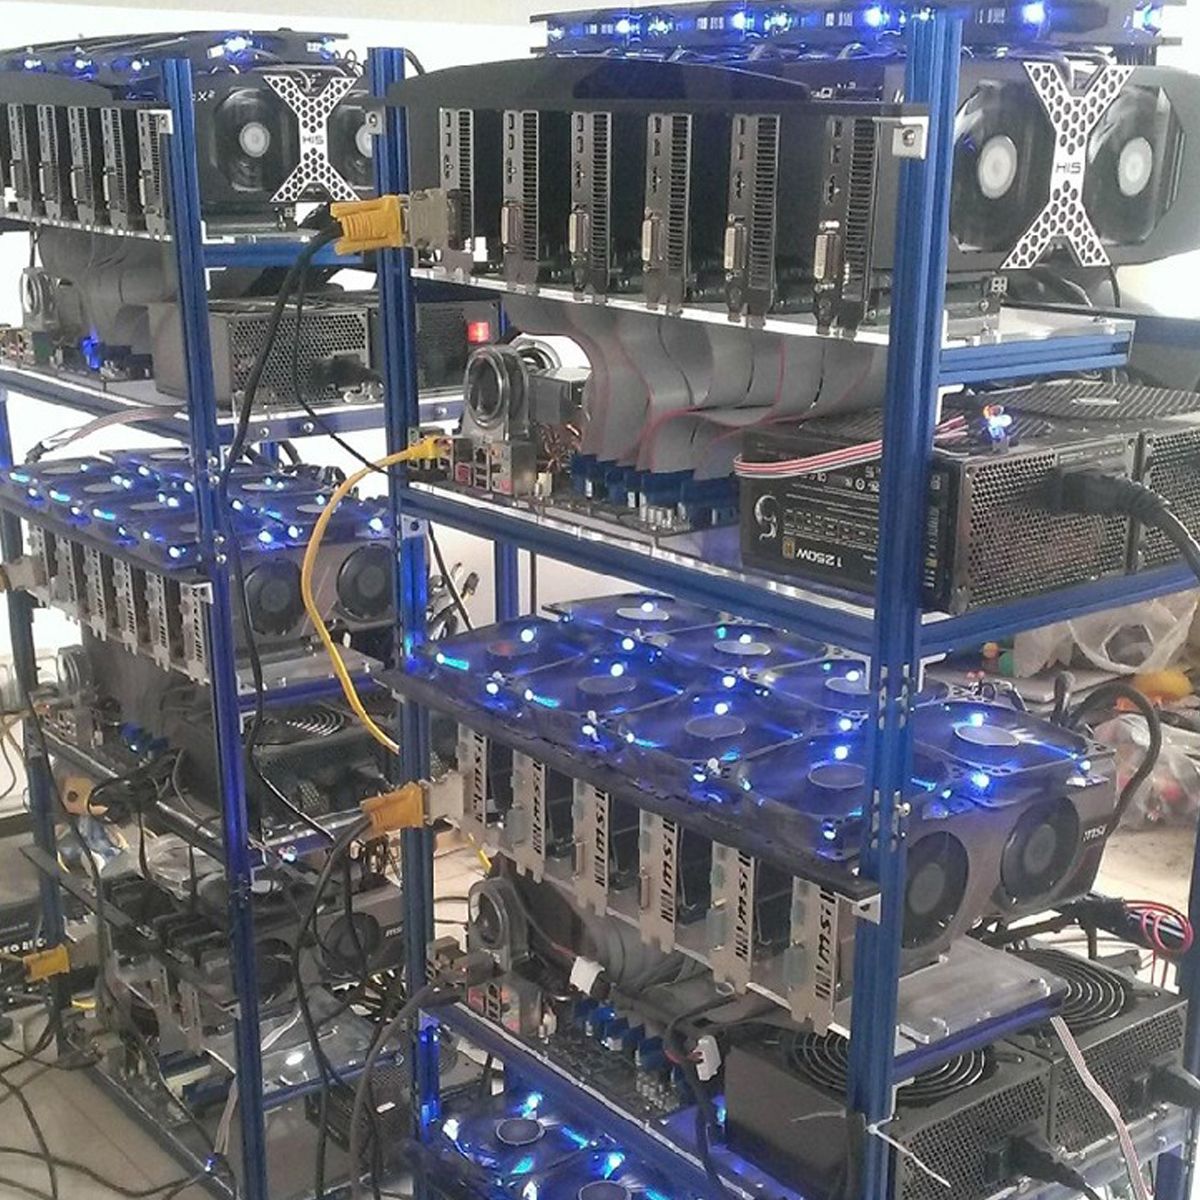 Aluminum-Open-Air-Frame-Mining-Miner-Rig-Case-Stackable-For-6-GPU-ETH-Ethereum-1243675